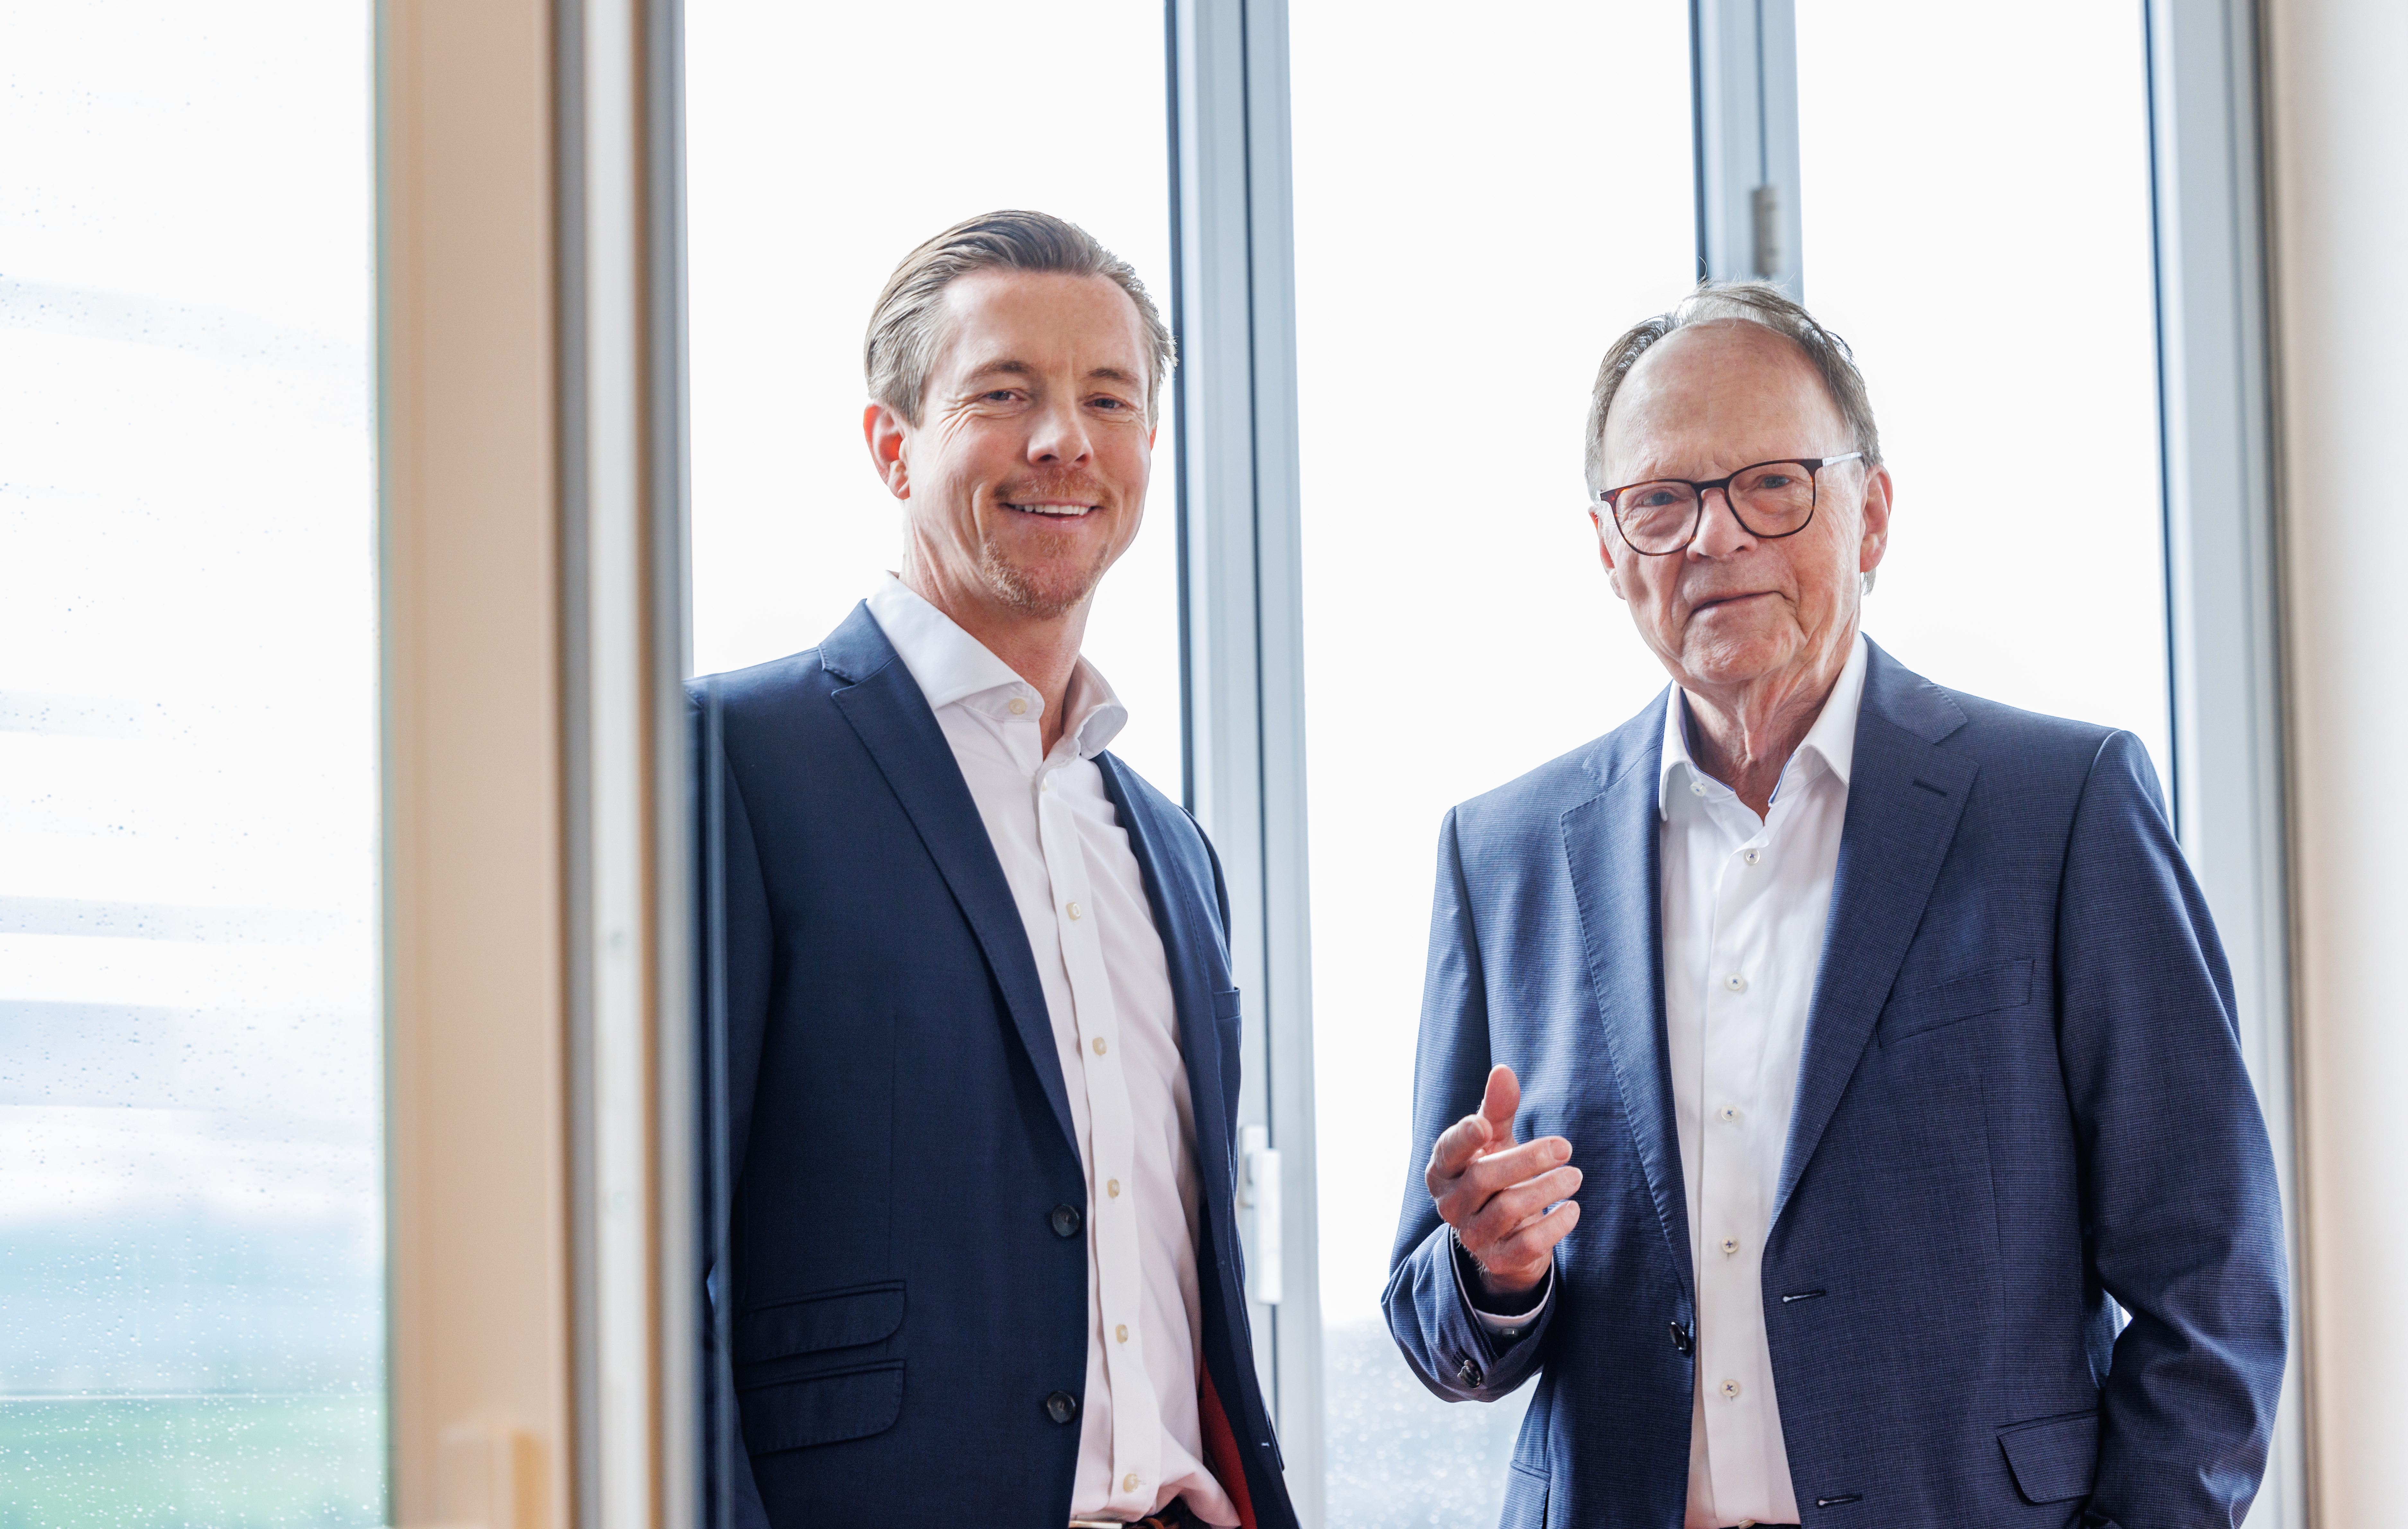 On the road to success in Bentley Style in Baden Württemberg: Lars Sunnanväder and Sebastian Büchert are nominated for Entrepreneur of the Year 2023